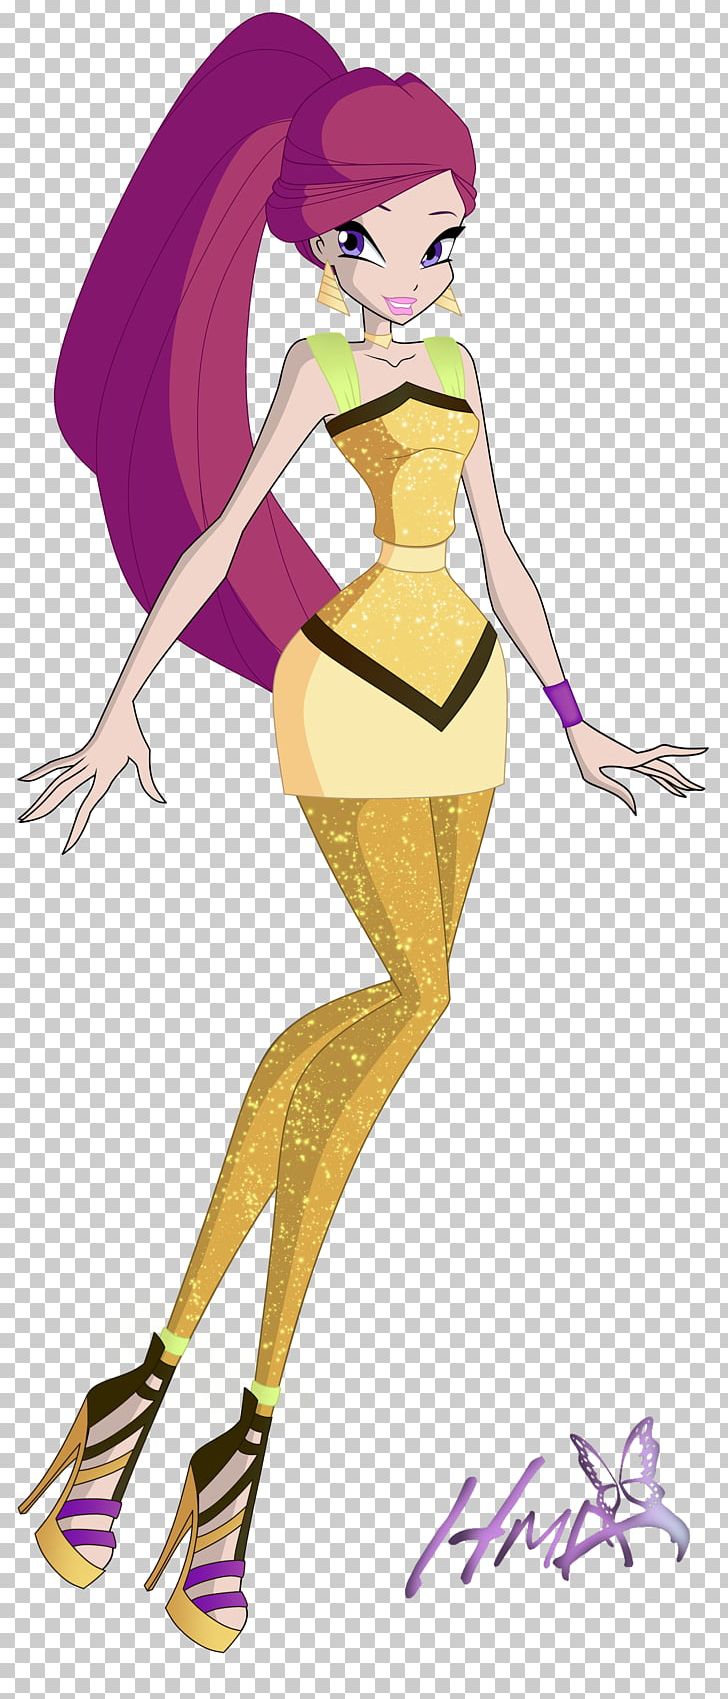 Roxy Musa Winx Club PNG, Clipart, Anime, Arm, Art, Beauty, Cartoon Free PNG Download